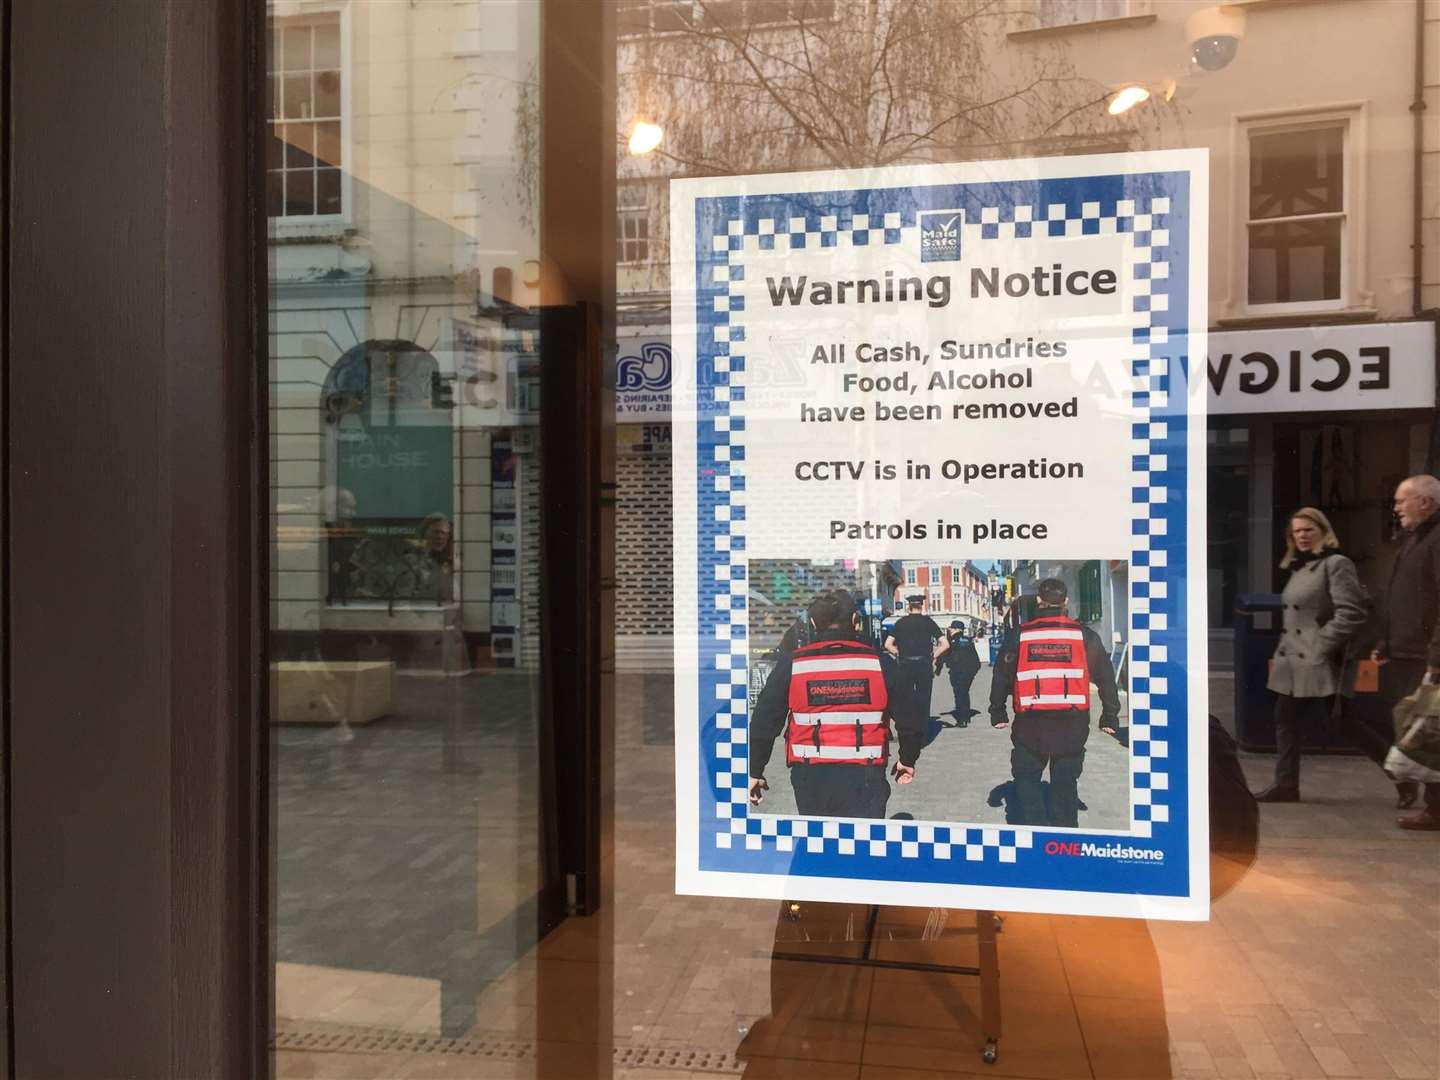 A warning notice has been put up in the window of Monsoon in Maidstone